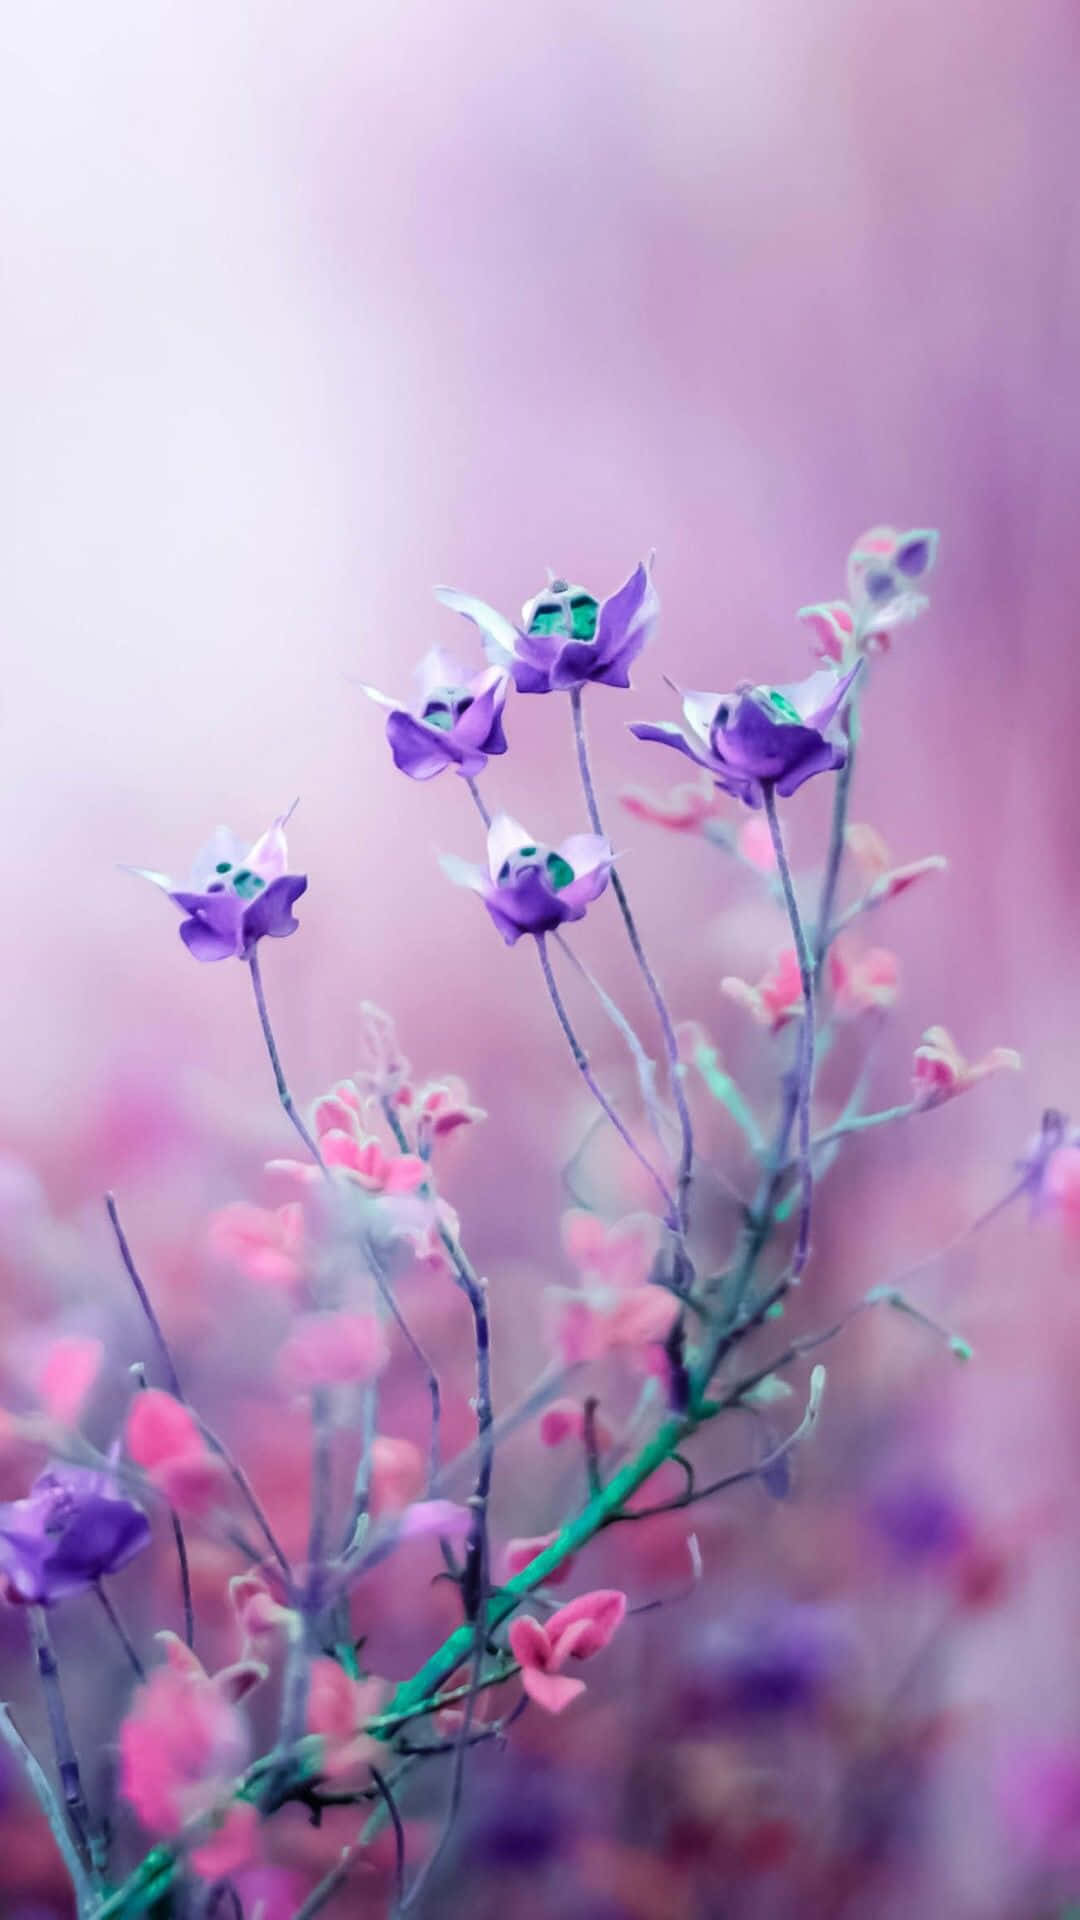 A beautiful flower adorns the background of this iPhone